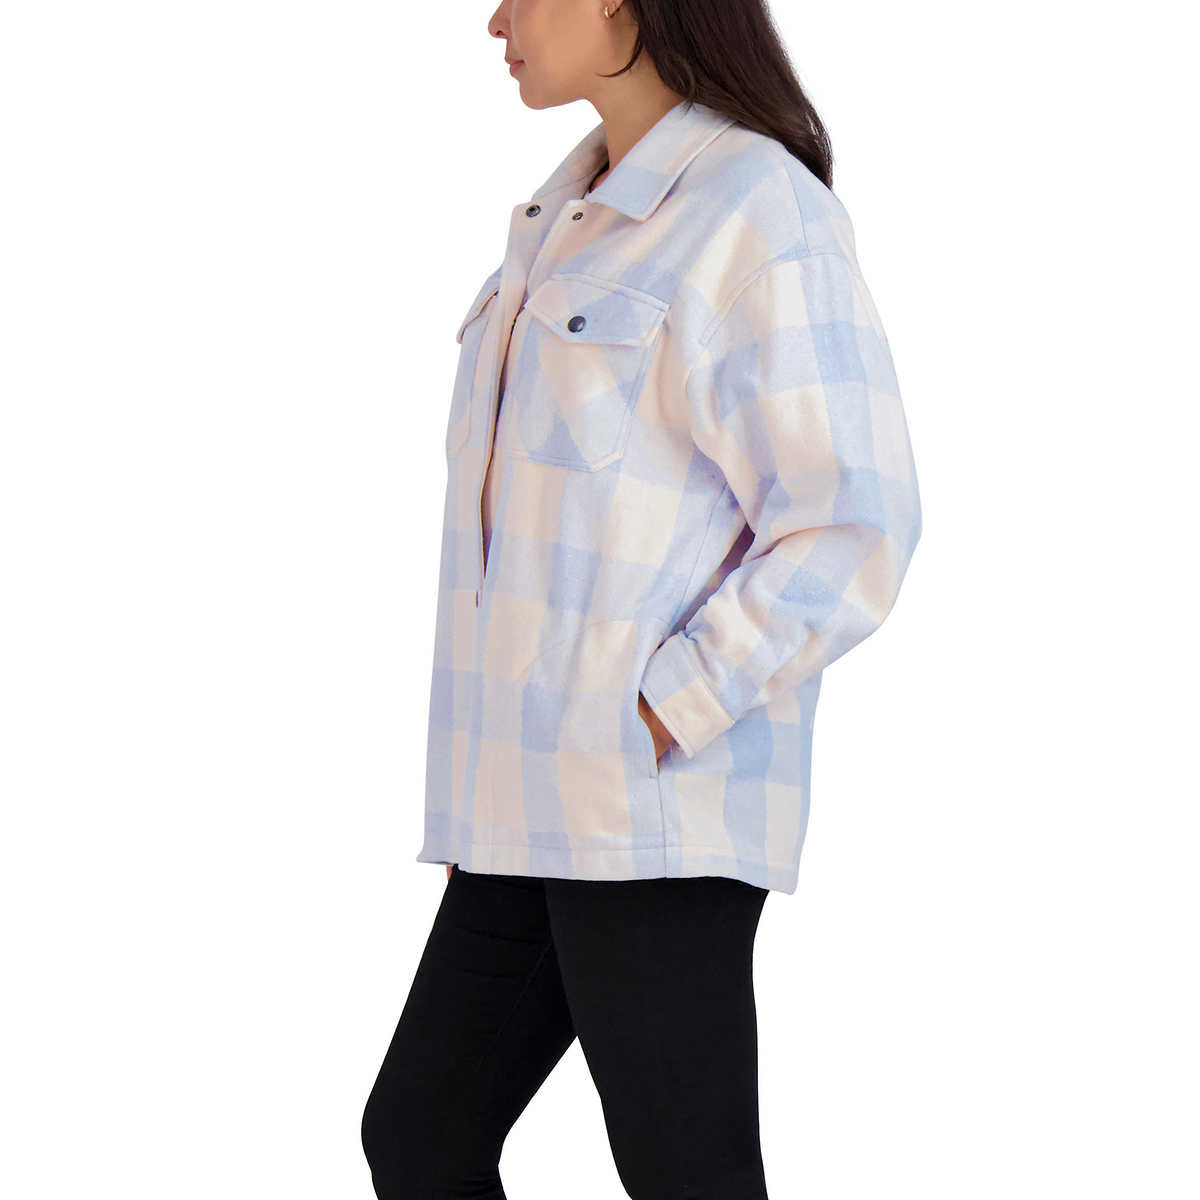 HFX Women's Relaxed Fit Front Snap Cozy Plaid Shirt Jacket